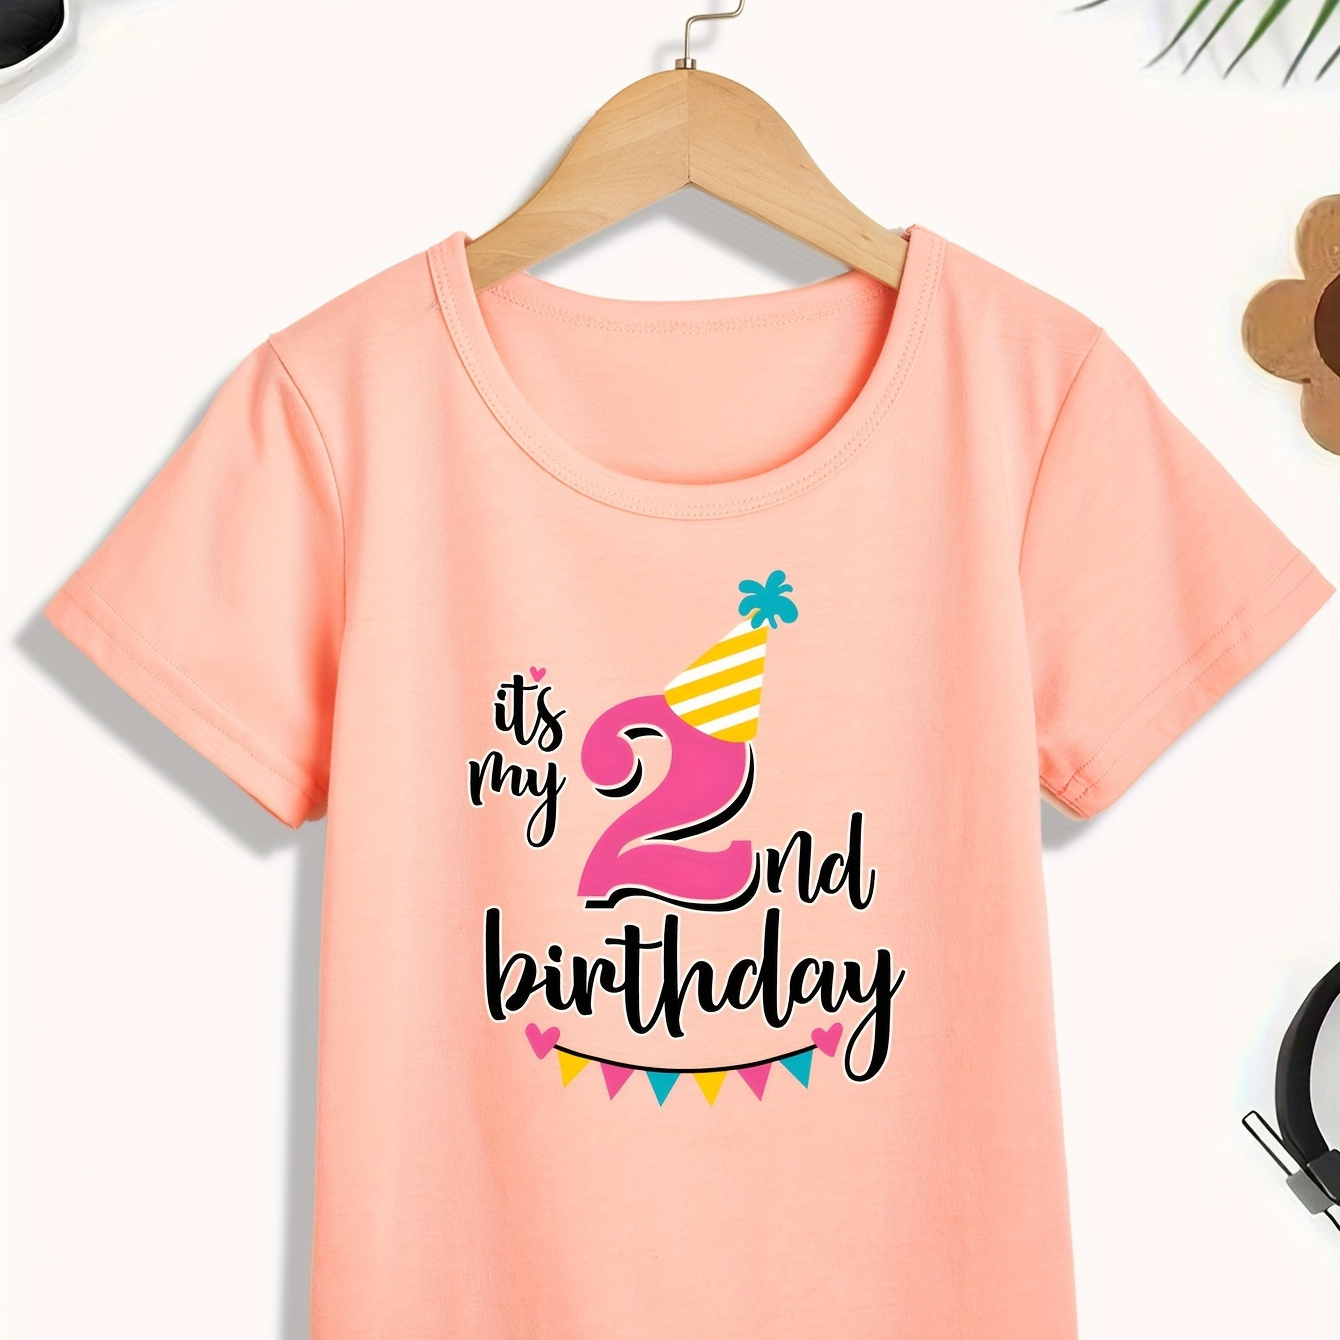 

Birthday "it's My 2nd Birthday" Letter Print Creative T-shirts, Soft & Elastic Comfy Crew Neck Short Sleeve Tee, Girl's Summer Tops